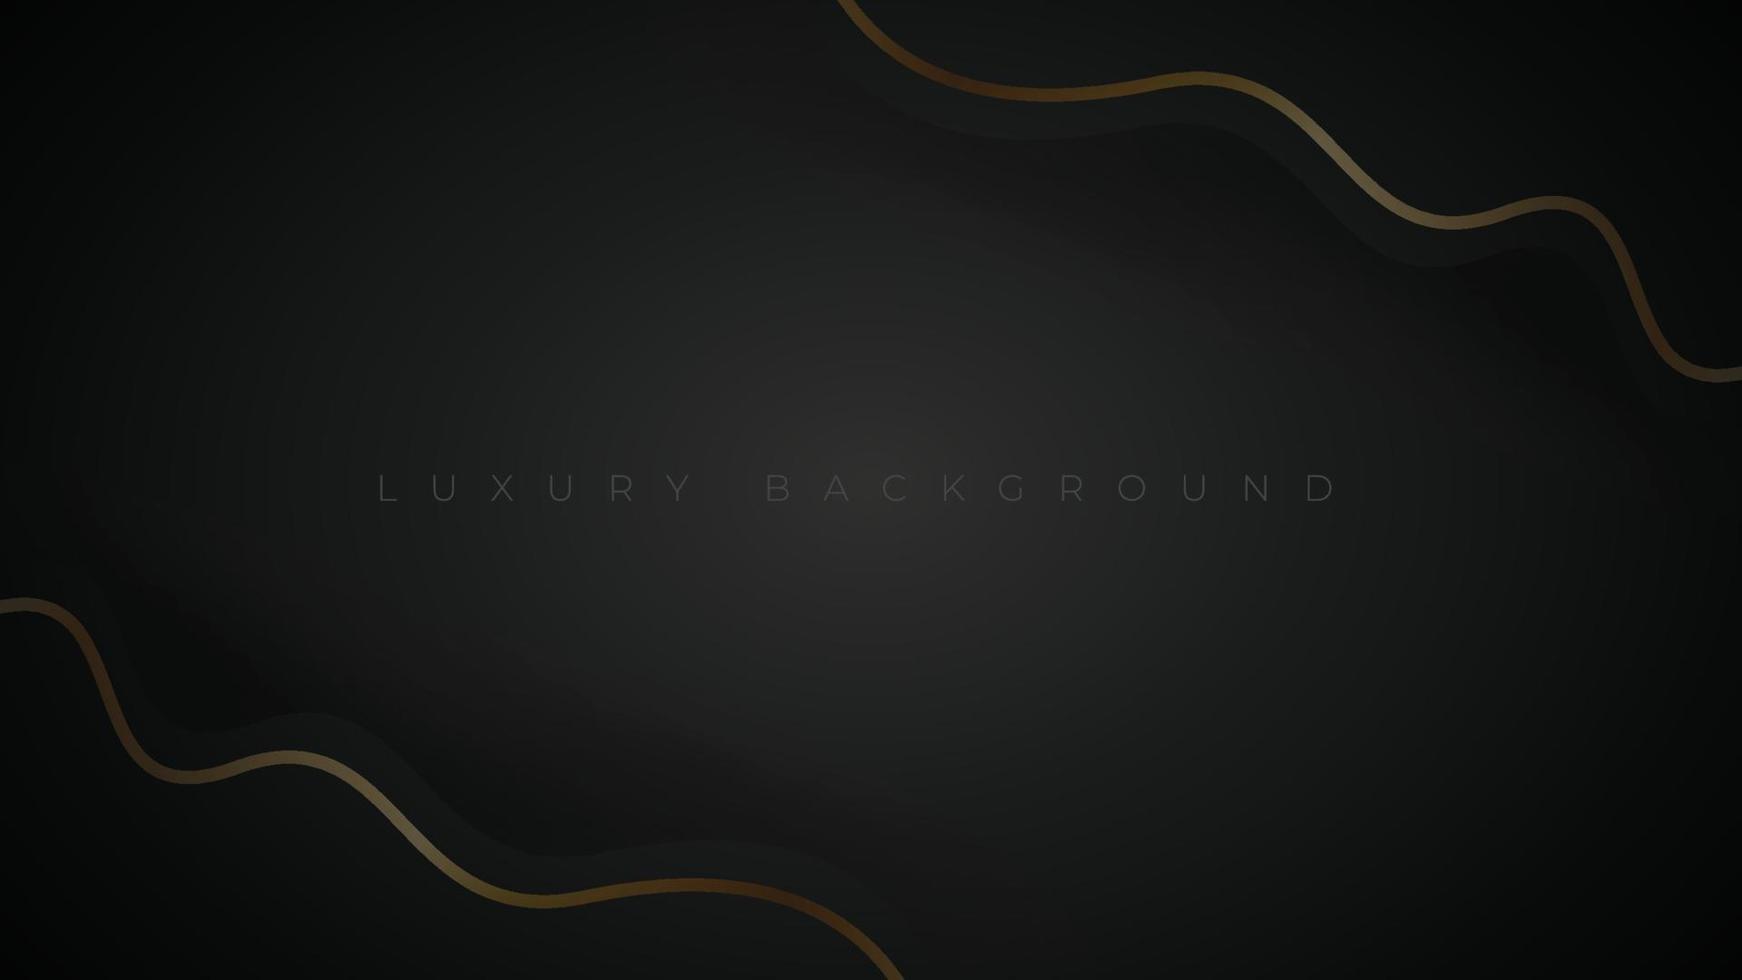 Abstract black wave and gold lines background. Dark wavy shape with golden lines. Luxury background vector illustration.